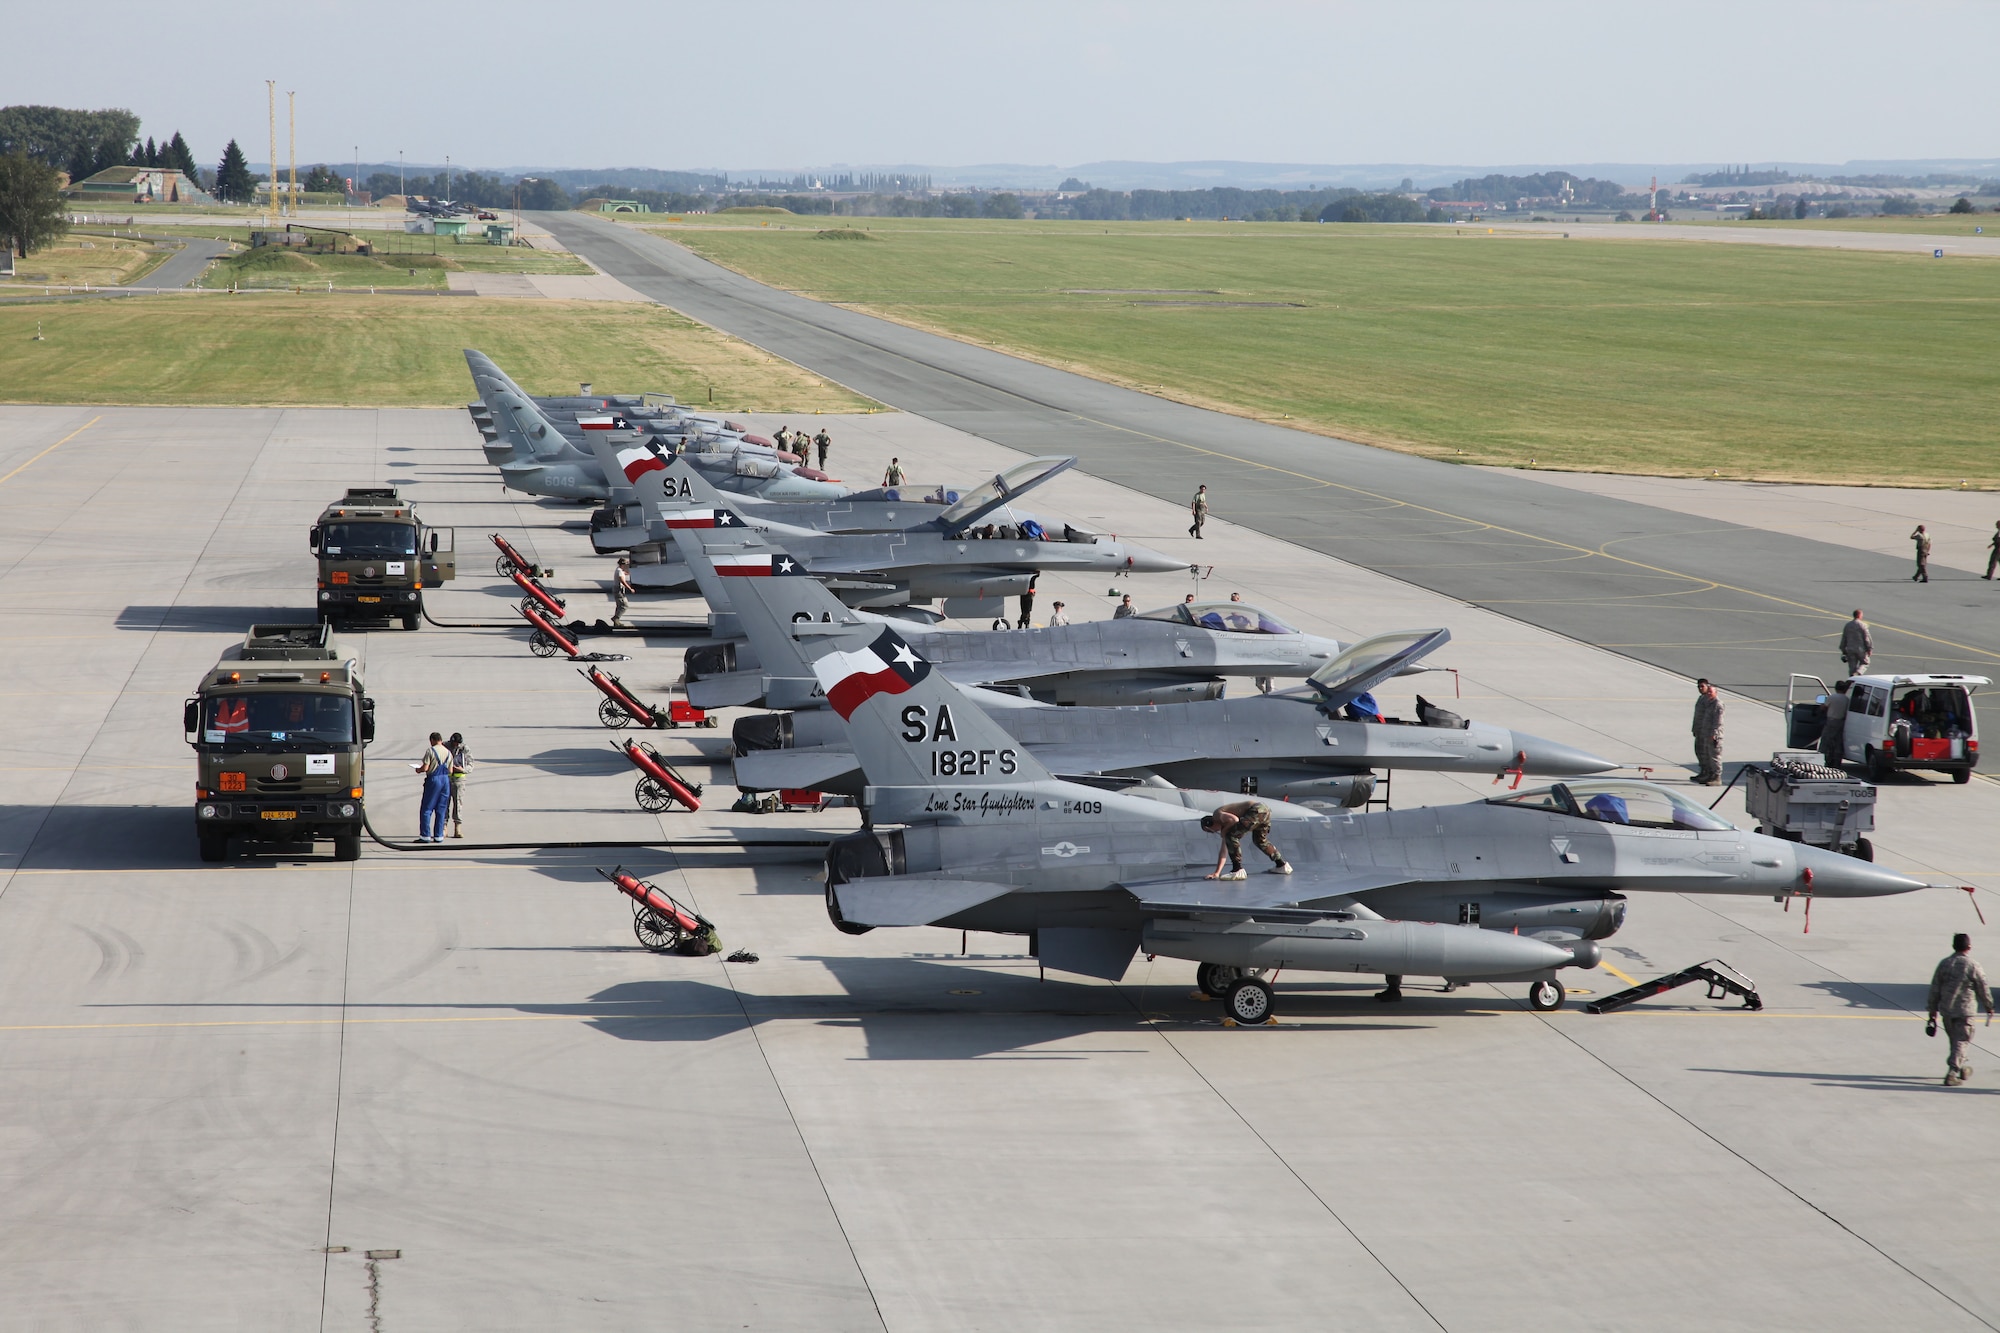 Czech Alcas and U.S. F-16s sit side-by-side on the ramp at Caslav Air Base.  Members of the Texas Air National Guard’s 149th Fighter Wing were in the Czech Republic conducting mutual training as part of the National Guard’s state partnership program.  (U.S. Air Force photo by Senior Master Sgt Miguel Arellano)